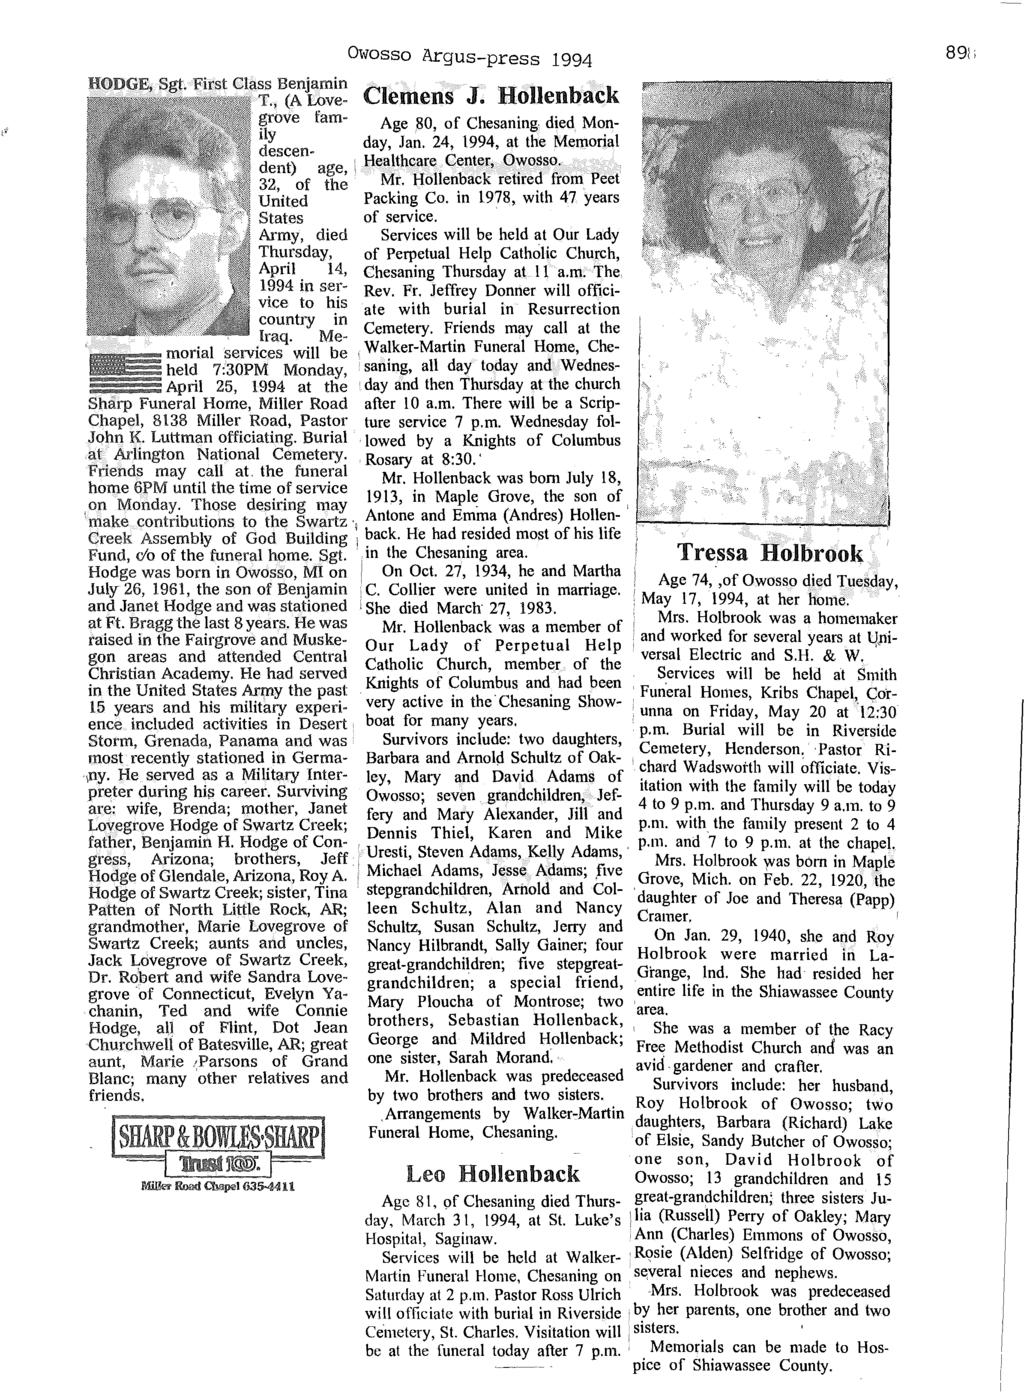 "A""... '.. "". Sgt. First Class Benjamin Owosso Argus-press 1994 (A Love- Clemens J. Hollenback grove fam- Age 80, of Chesaning died Mon- ~~scen- day, Jan.